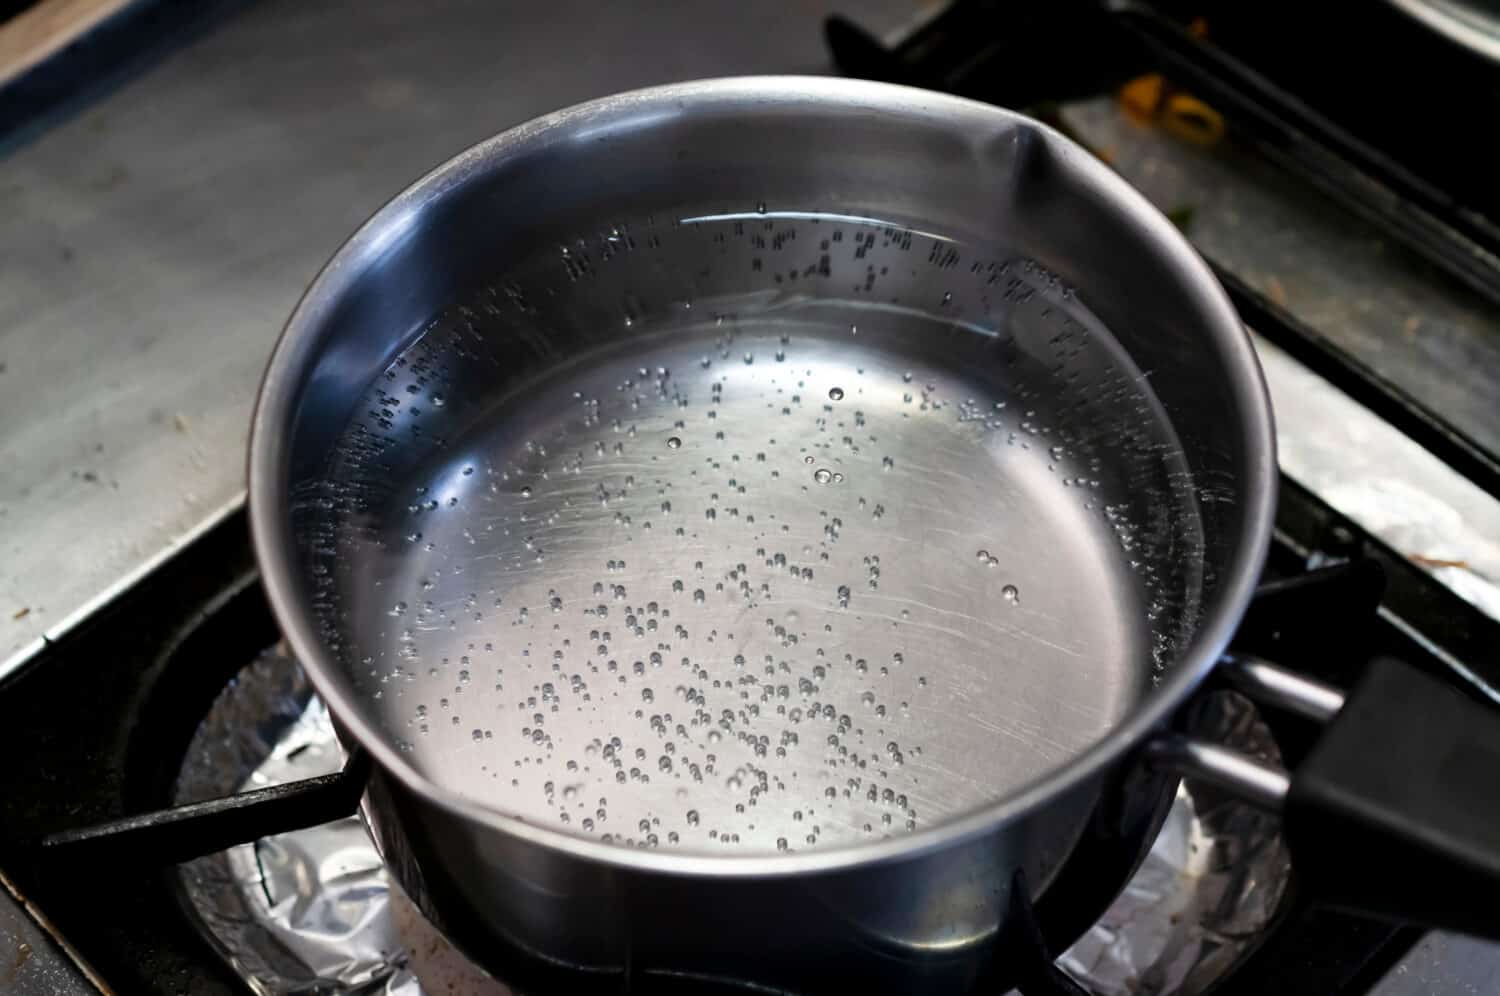 Boiling water in stainless pan in kitchen